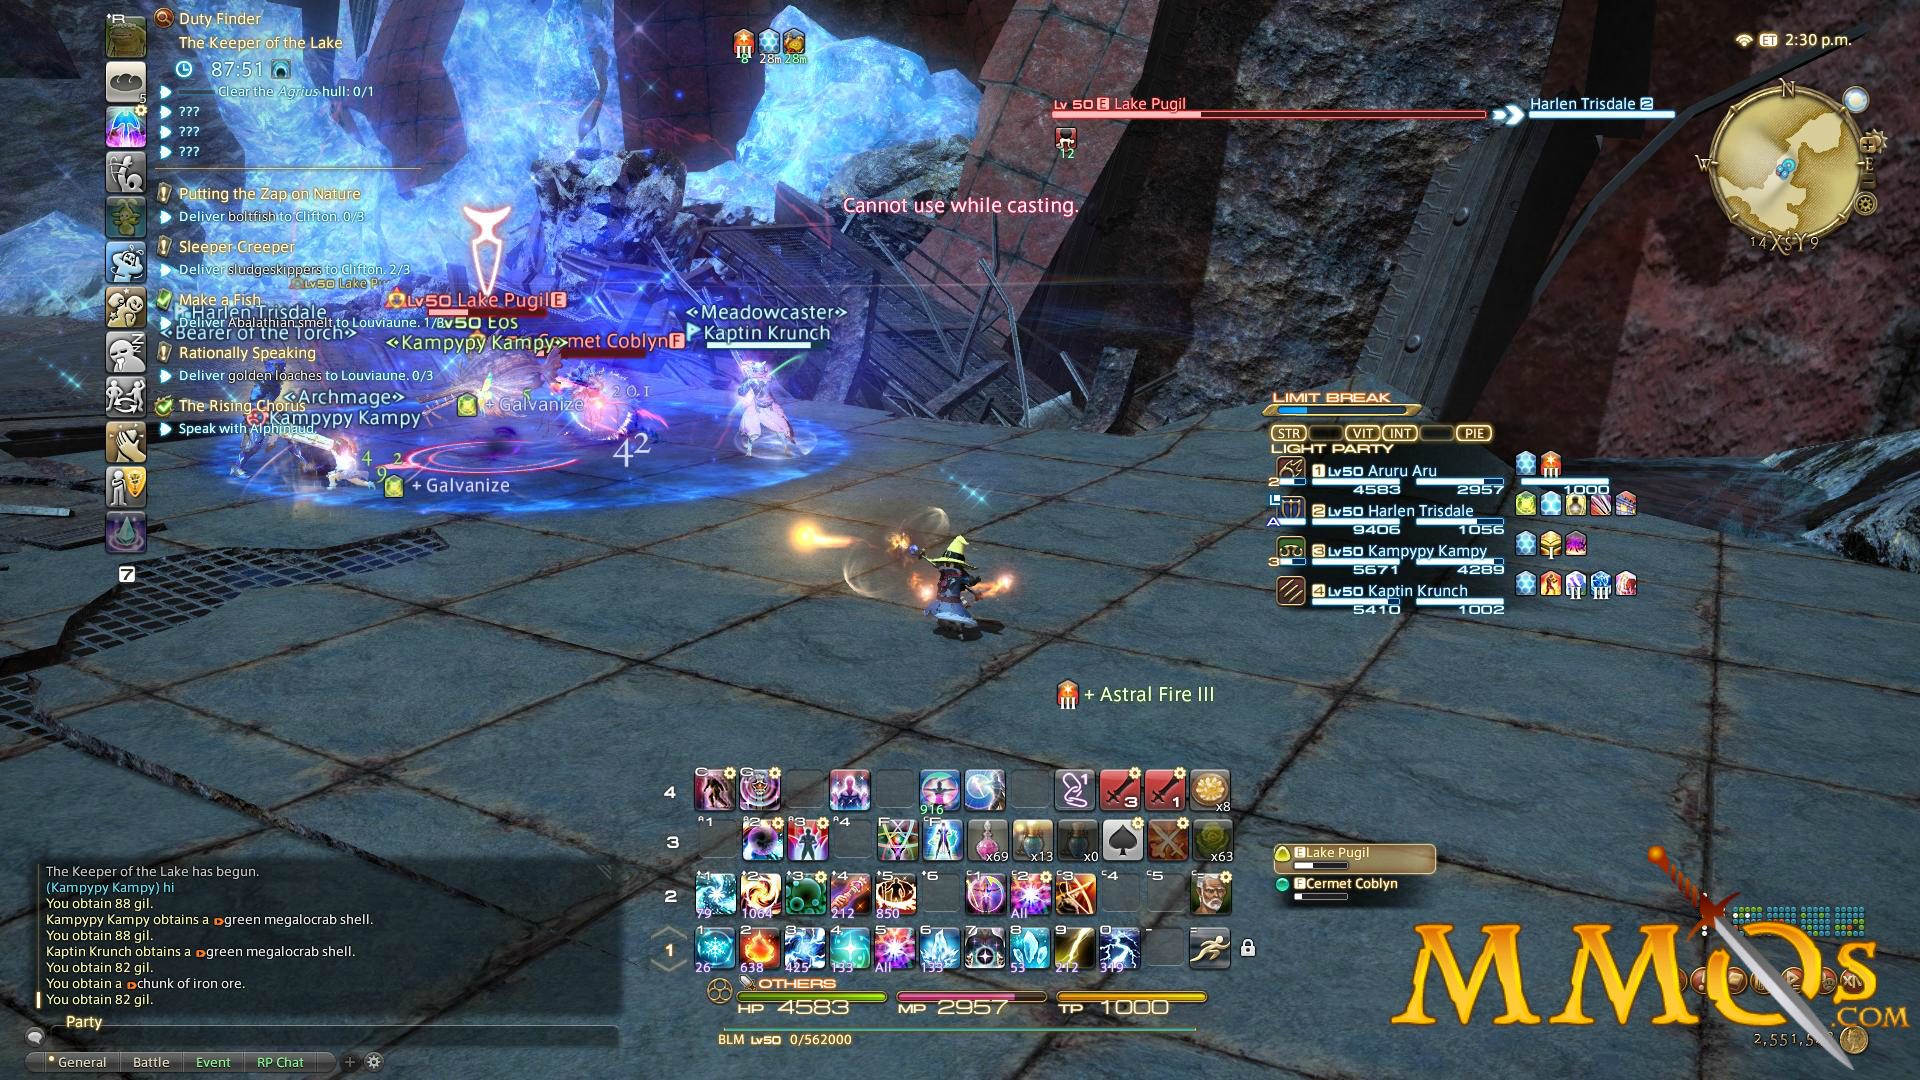 LagoFast: A Smooth Final Fantasy XIV Online Gaming Experience Provider